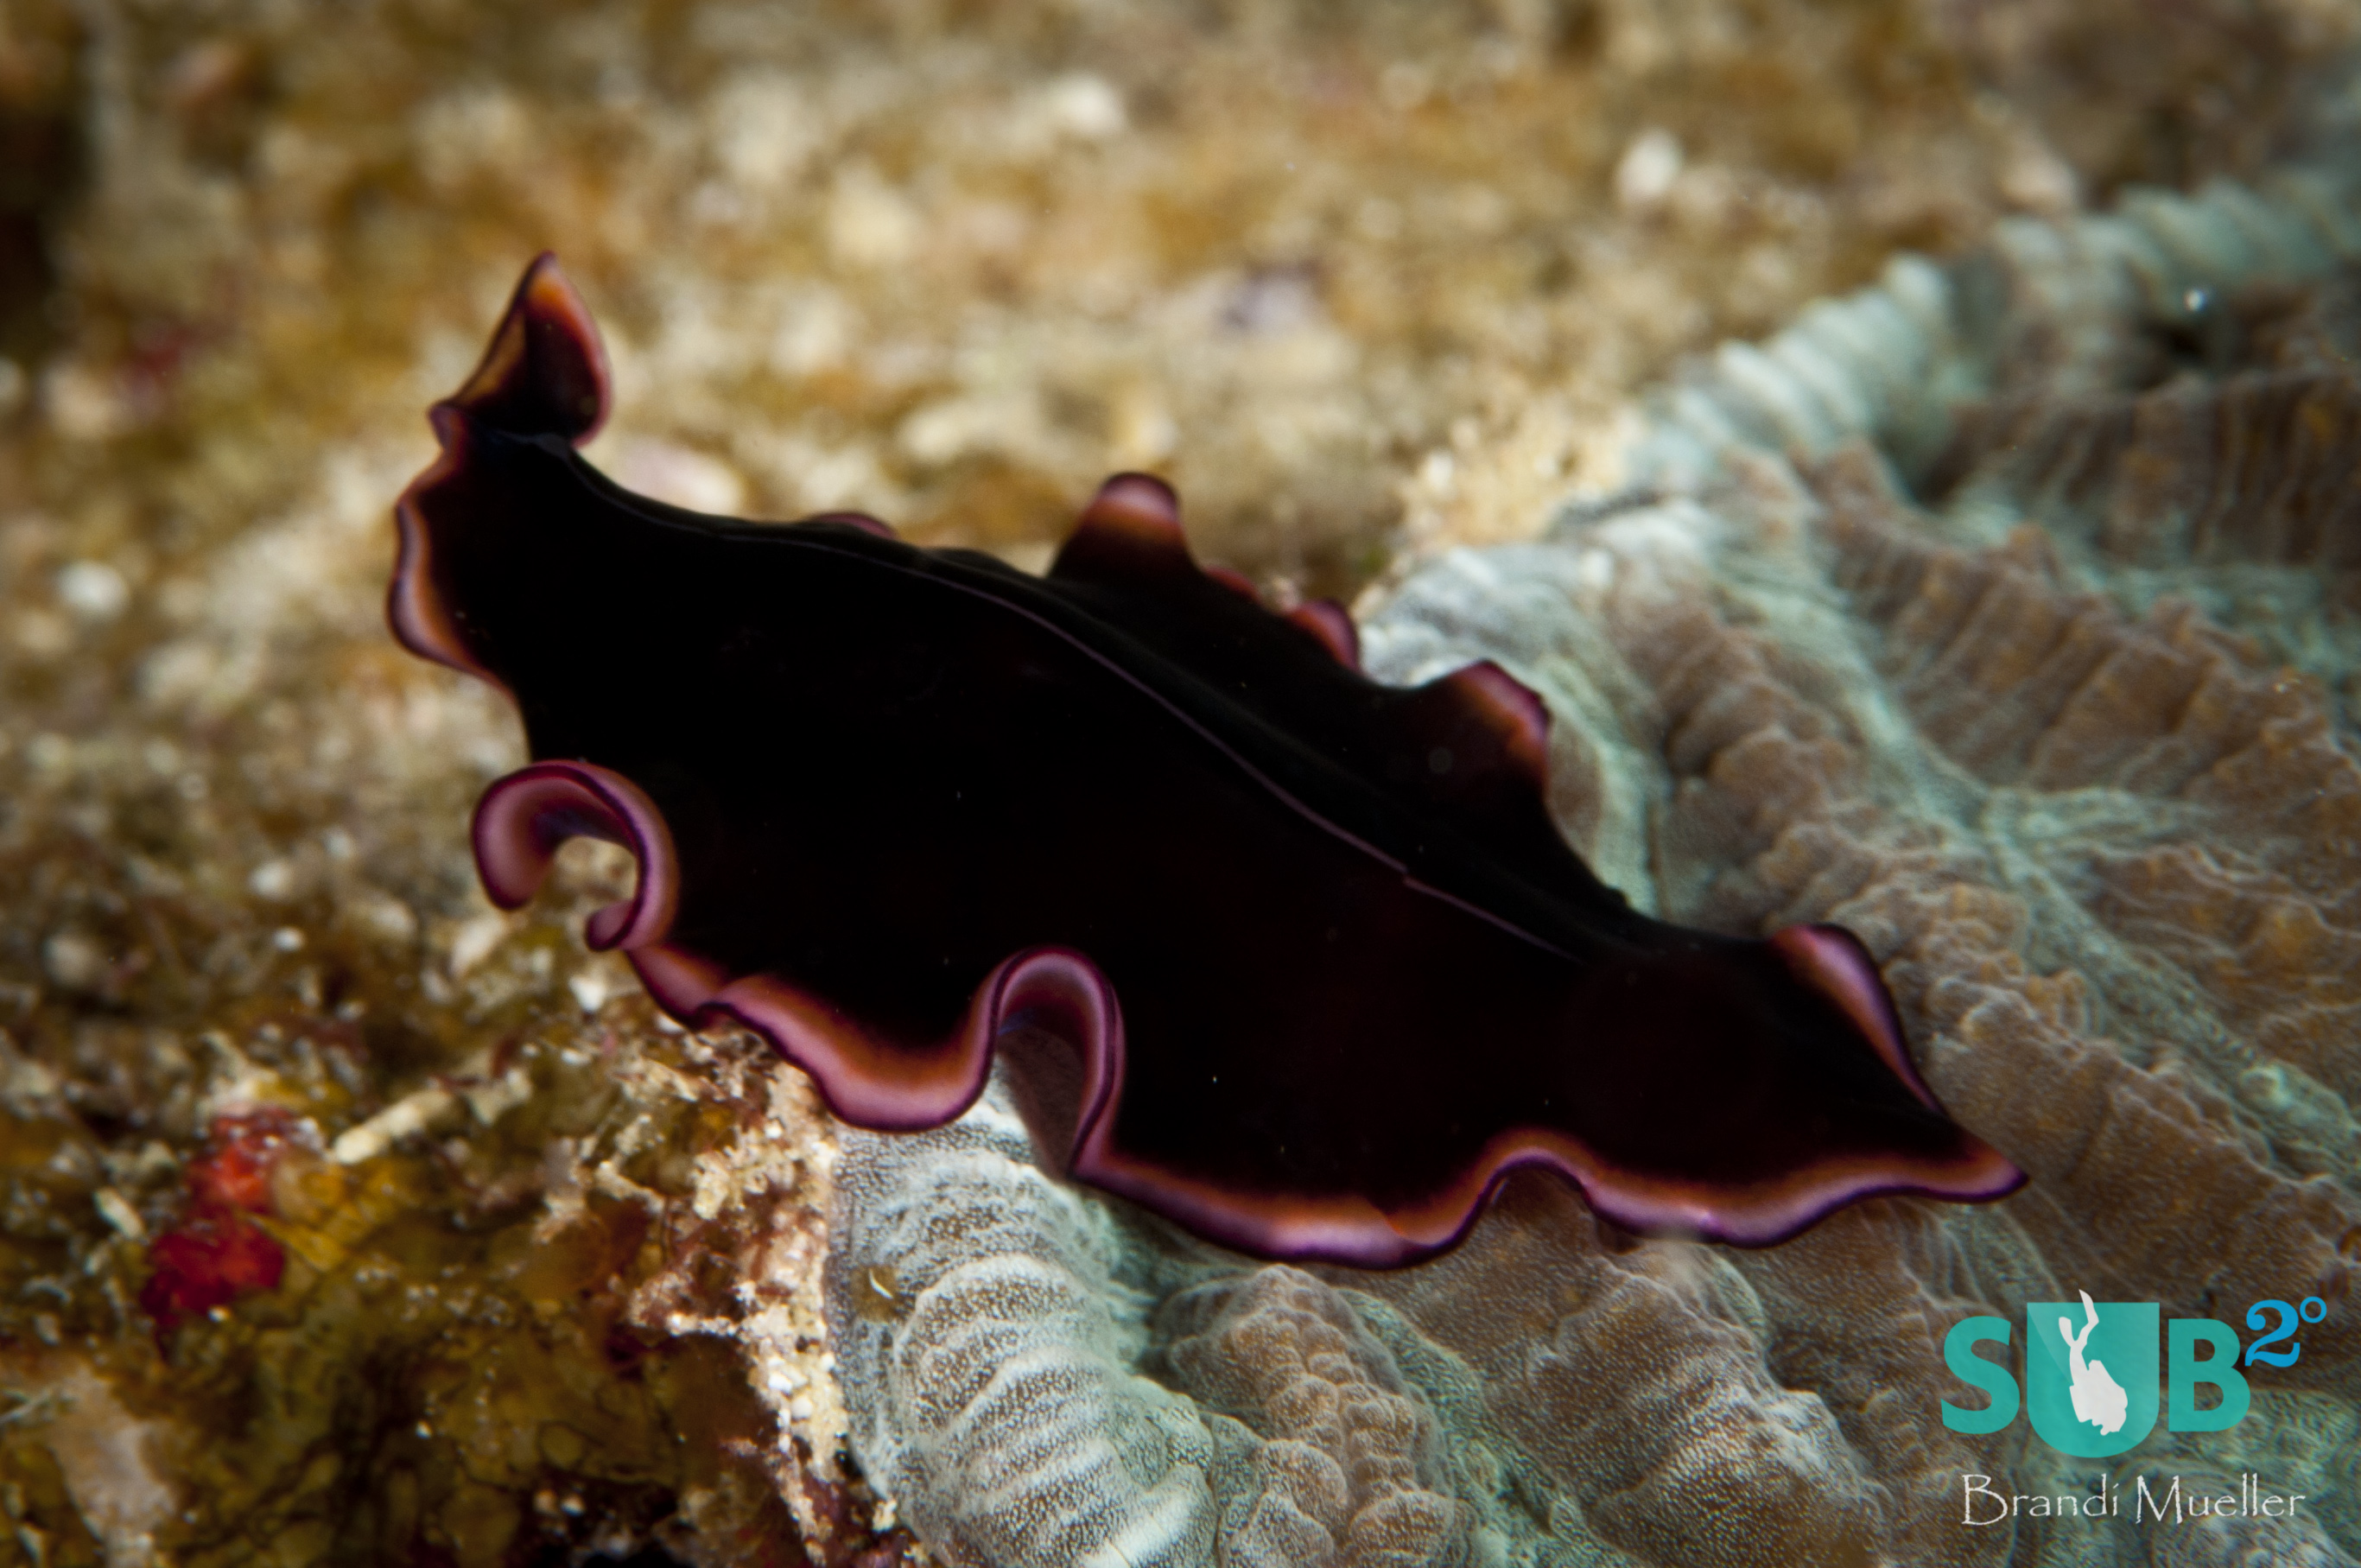 The glorious flatworm (Pseudobiceros gloriosus) gets its name from the pretty pink ring around its edges, in contrast to the rest of its velvet black body. 